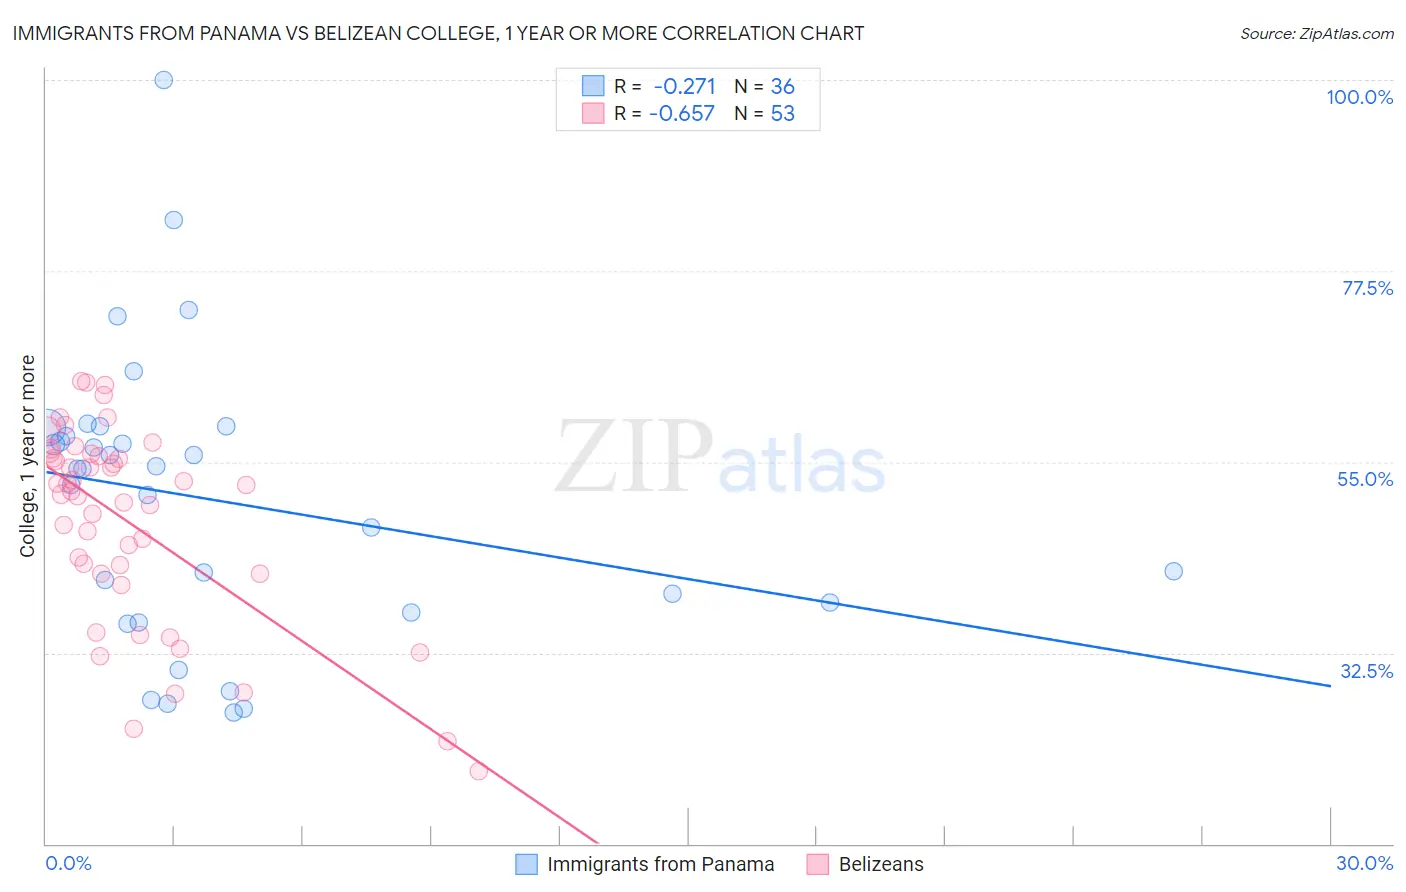 Immigrants from Panama vs Belizean College, 1 year or more